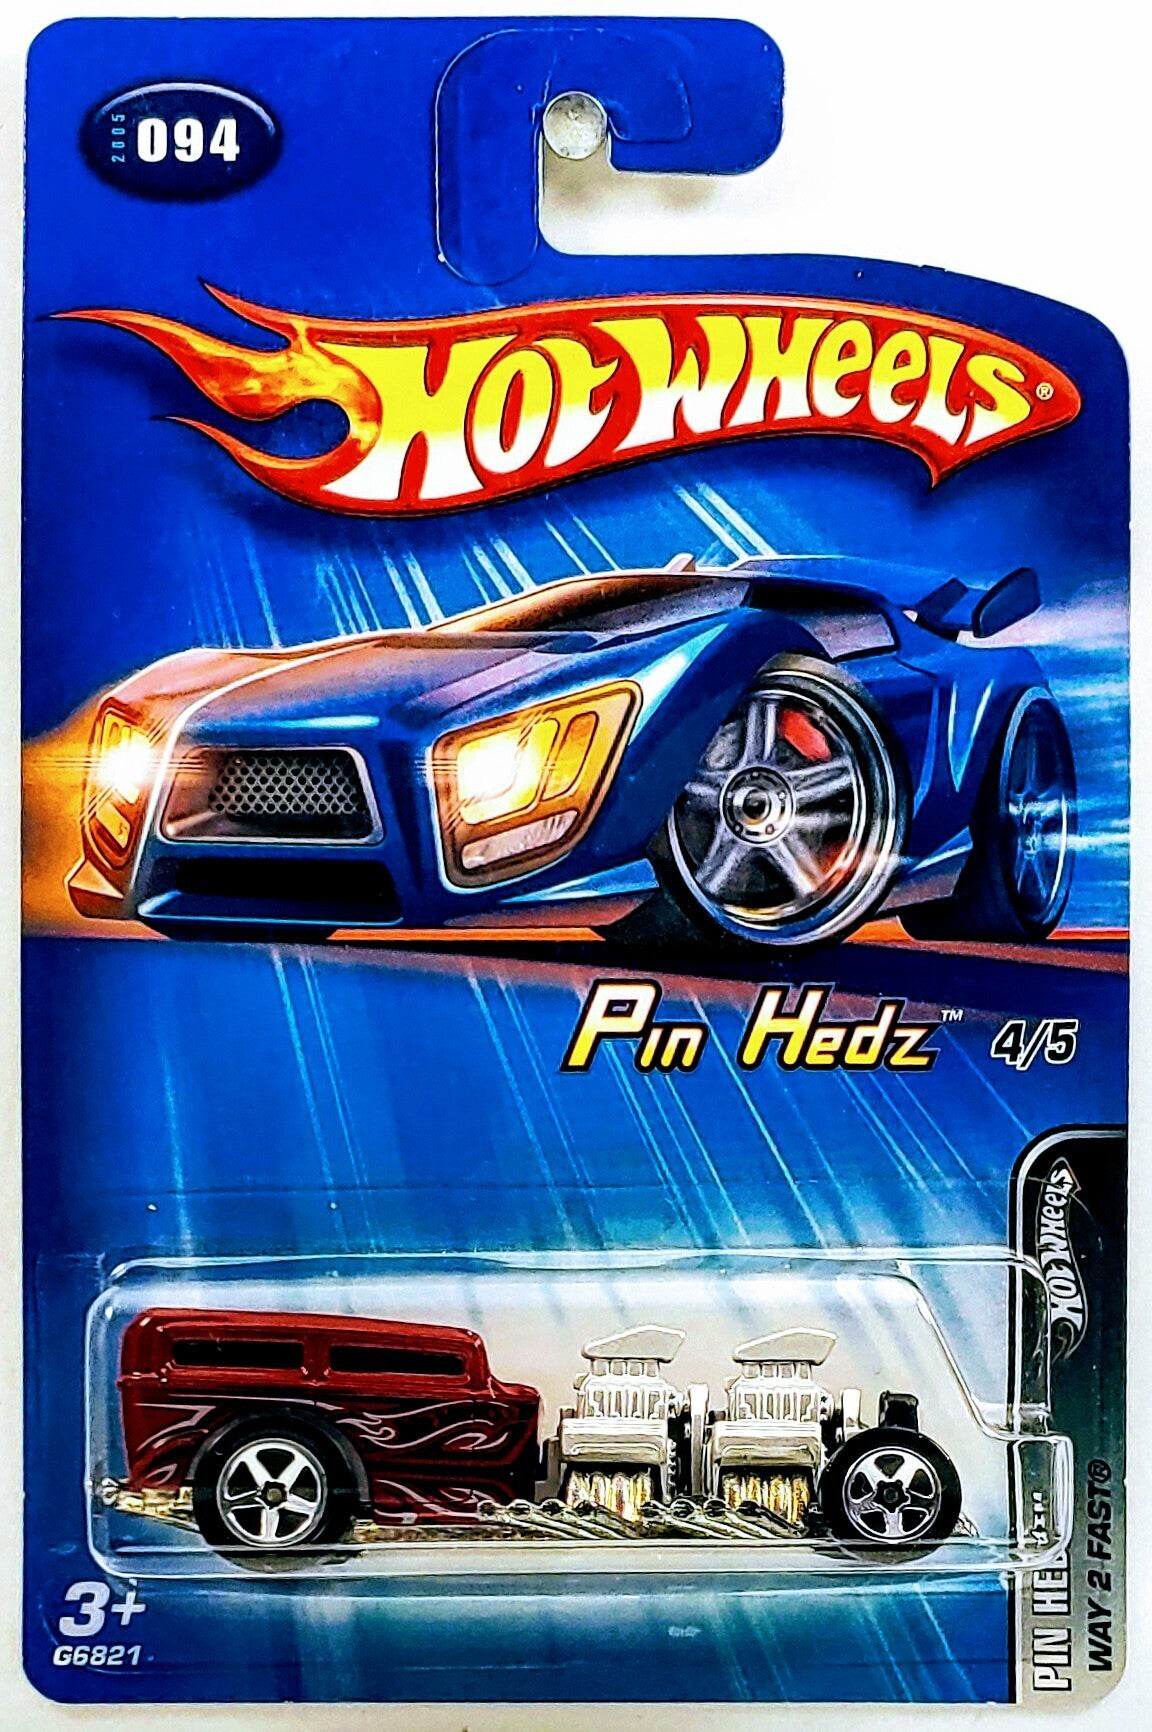 Hot Wheels 2005 - Collector # 094/183 - Pin Hedz 4/5 - Way 2 Fast - Dark Red - Silver Engines - USA